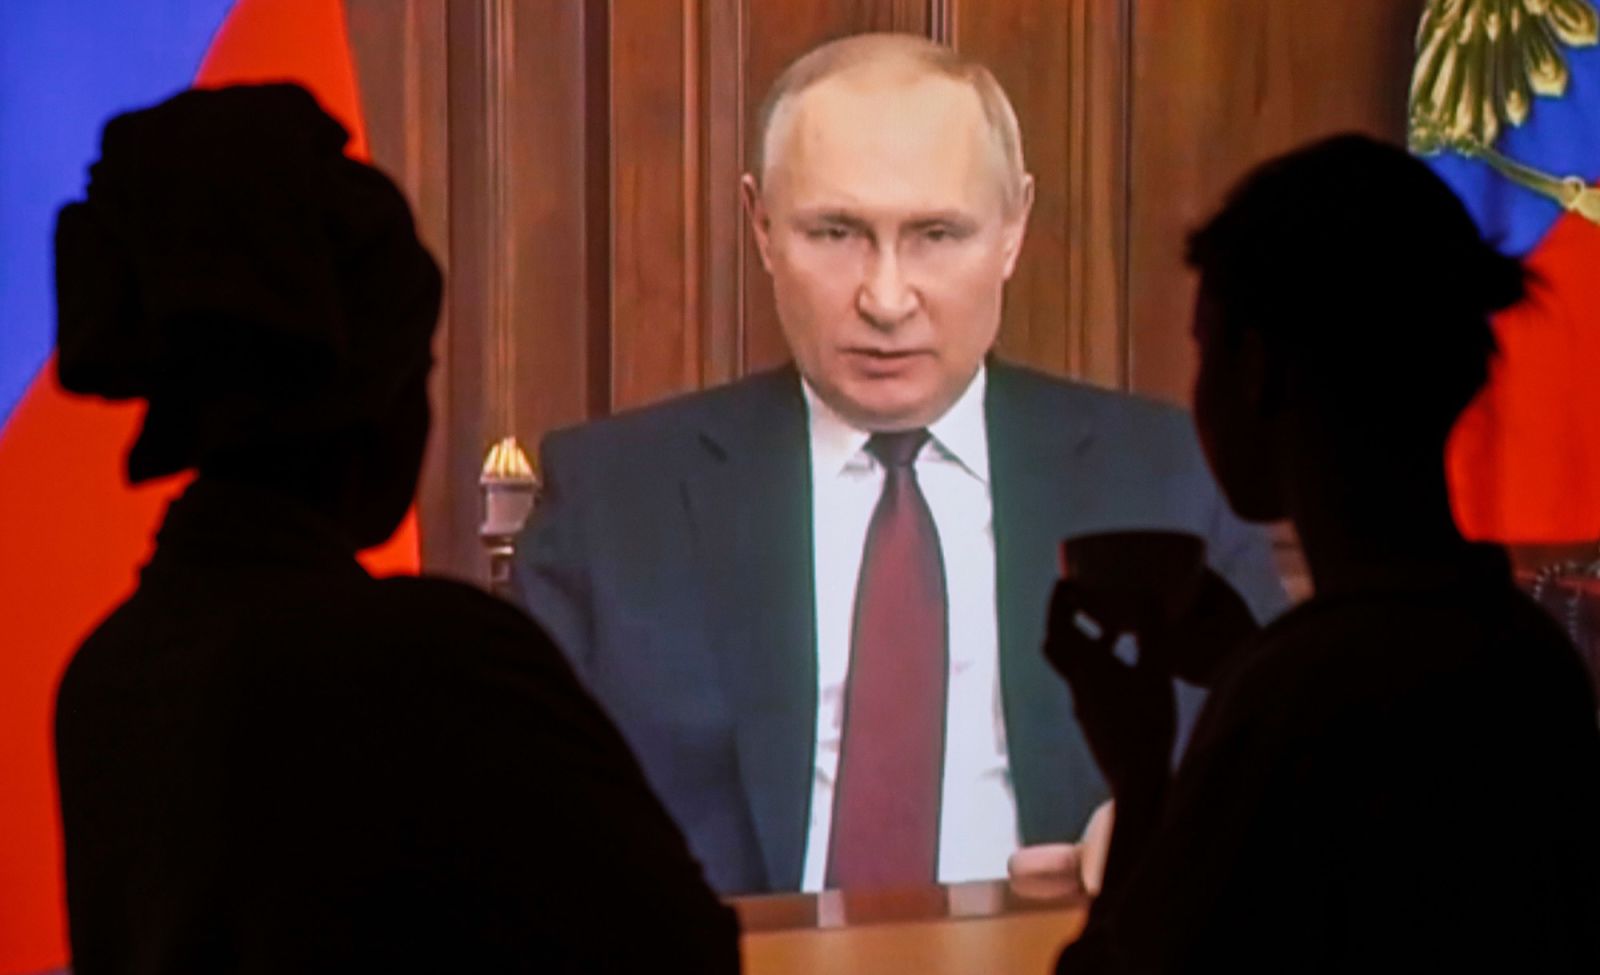 People in Moscow watch a televised address by Russian President Vladimir Putin as he announces a military operation in the Donbas region of eastern Ukraine on February 24.